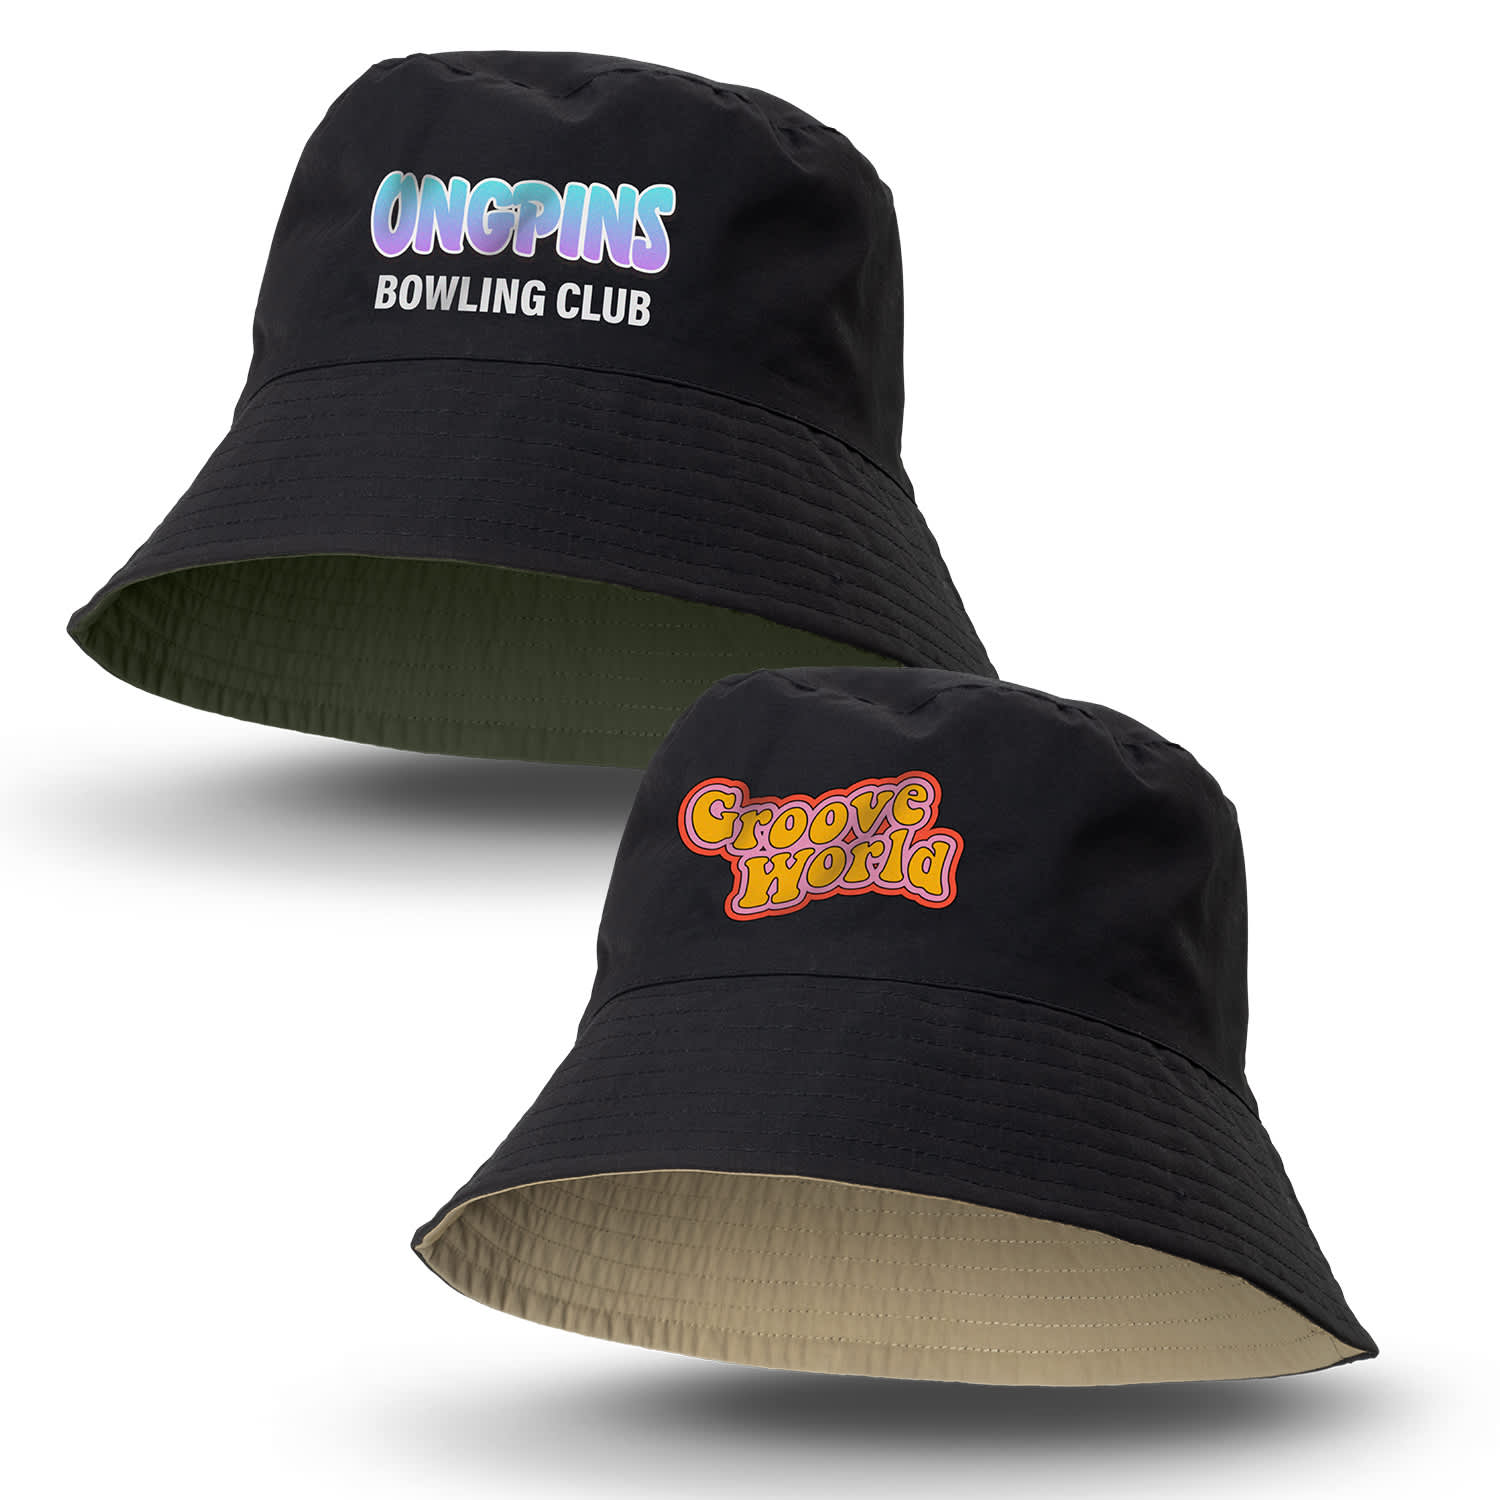 Reversible Ripstop Bucket Hat | Towel Bucket Hat | Towelling Bucket Hat NZ | Custom Bucket Hats | Customised Bucket Hats | Personalised Bucket Hats | Custom Merchandise | Merchandise | Customised Gifts NZ | Corporate Gifts | Promotional Products NZ | 